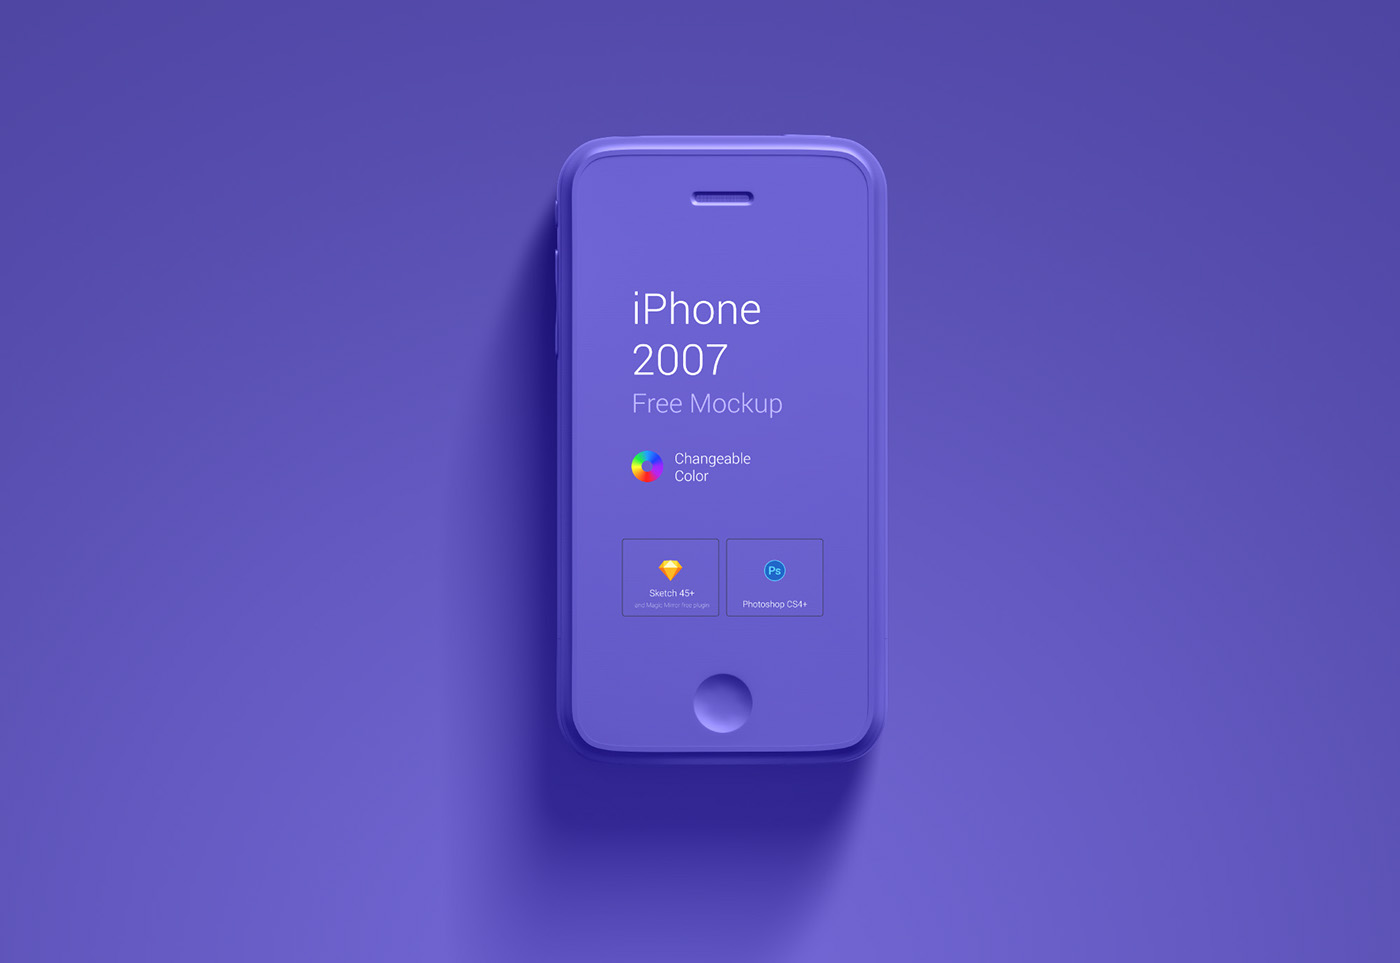 iphone Samsung phone Mockup 1st Generation lstore.graphics download free freebie mock-up